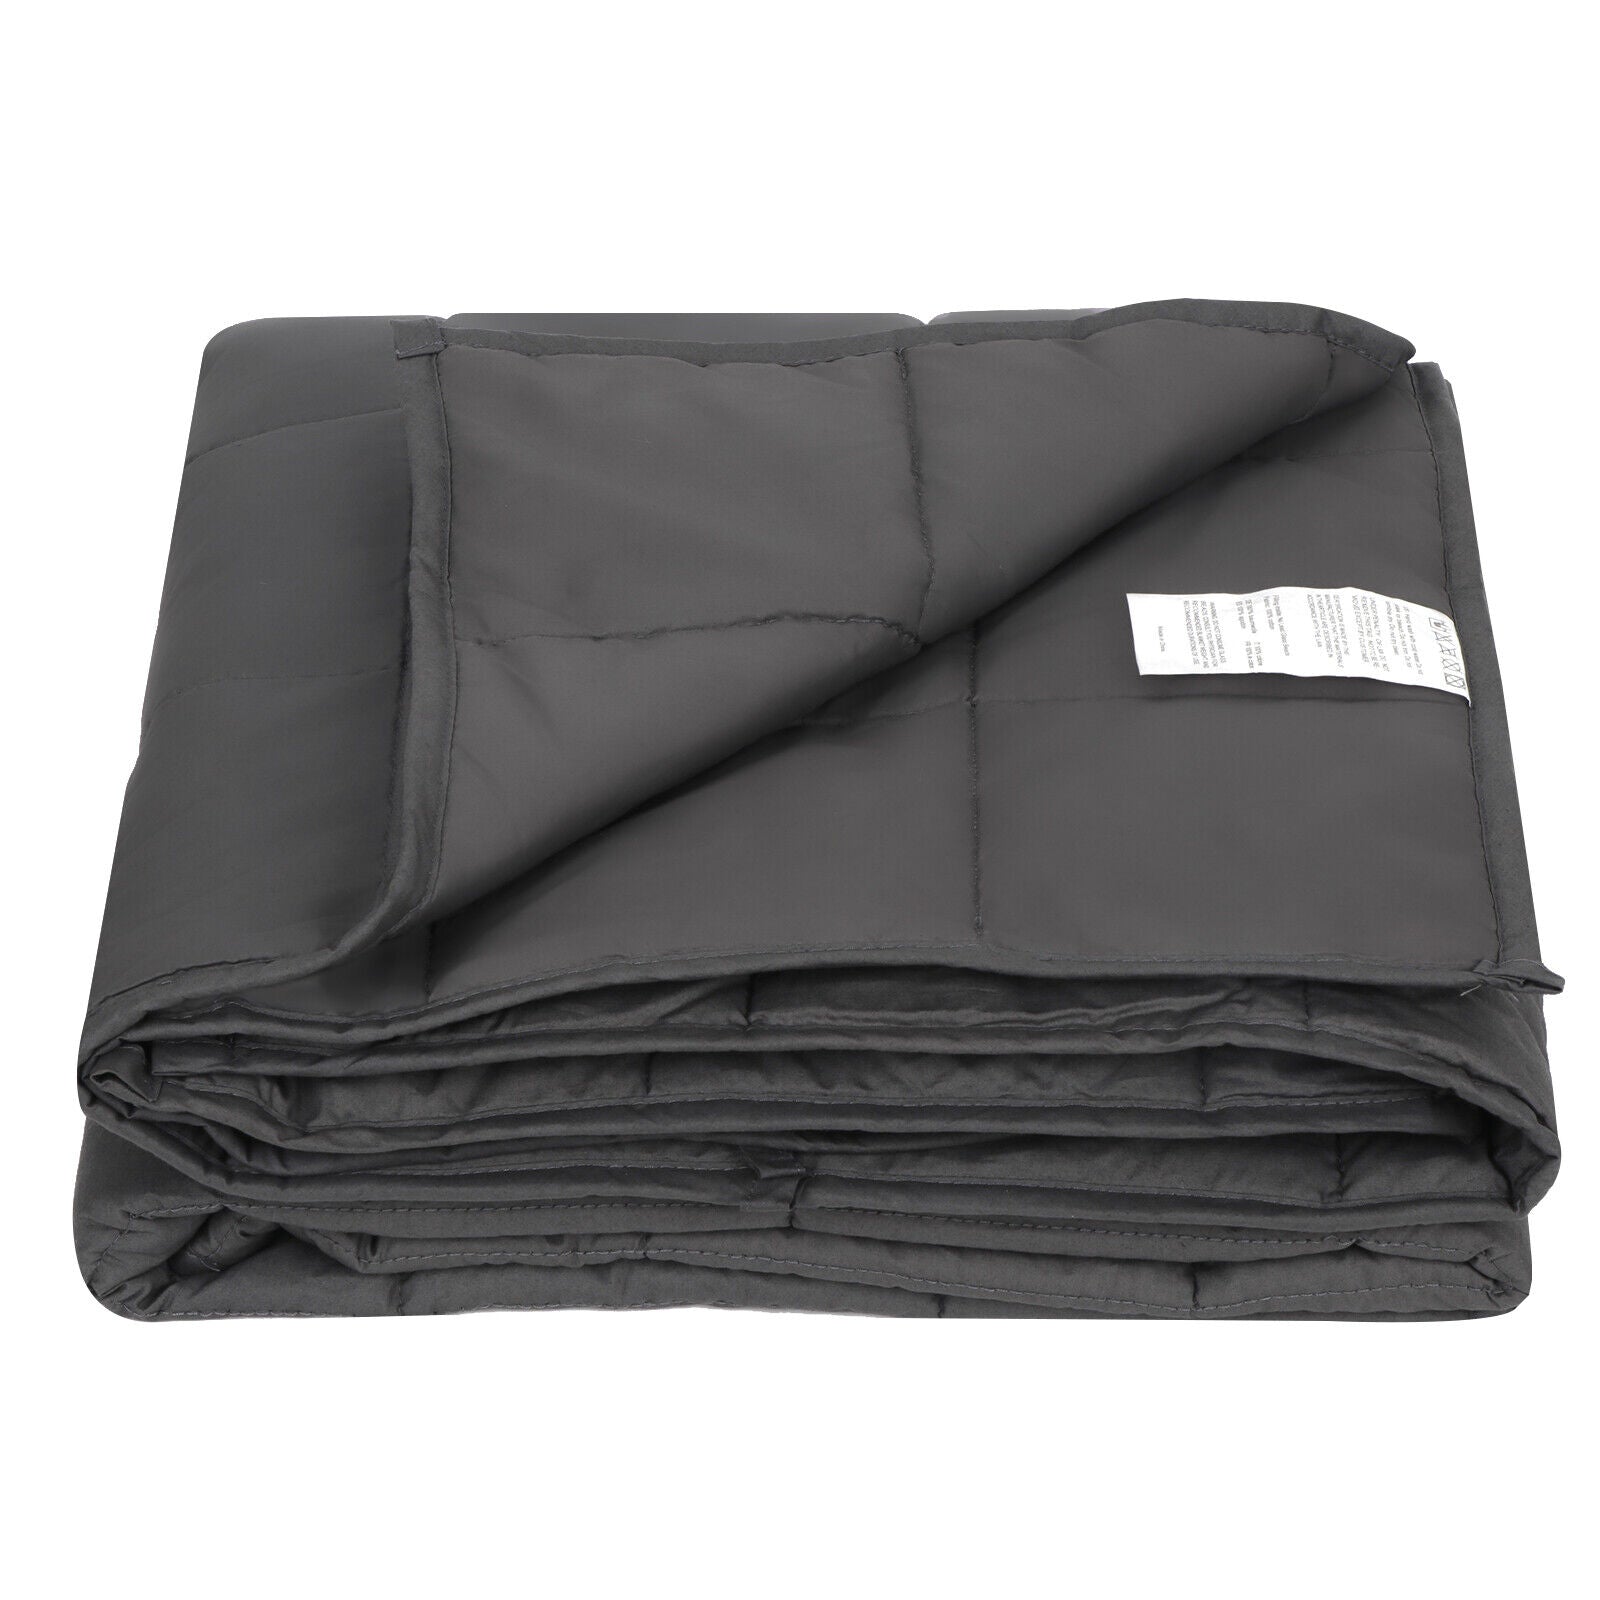 Weighted Blanket 48 x 72